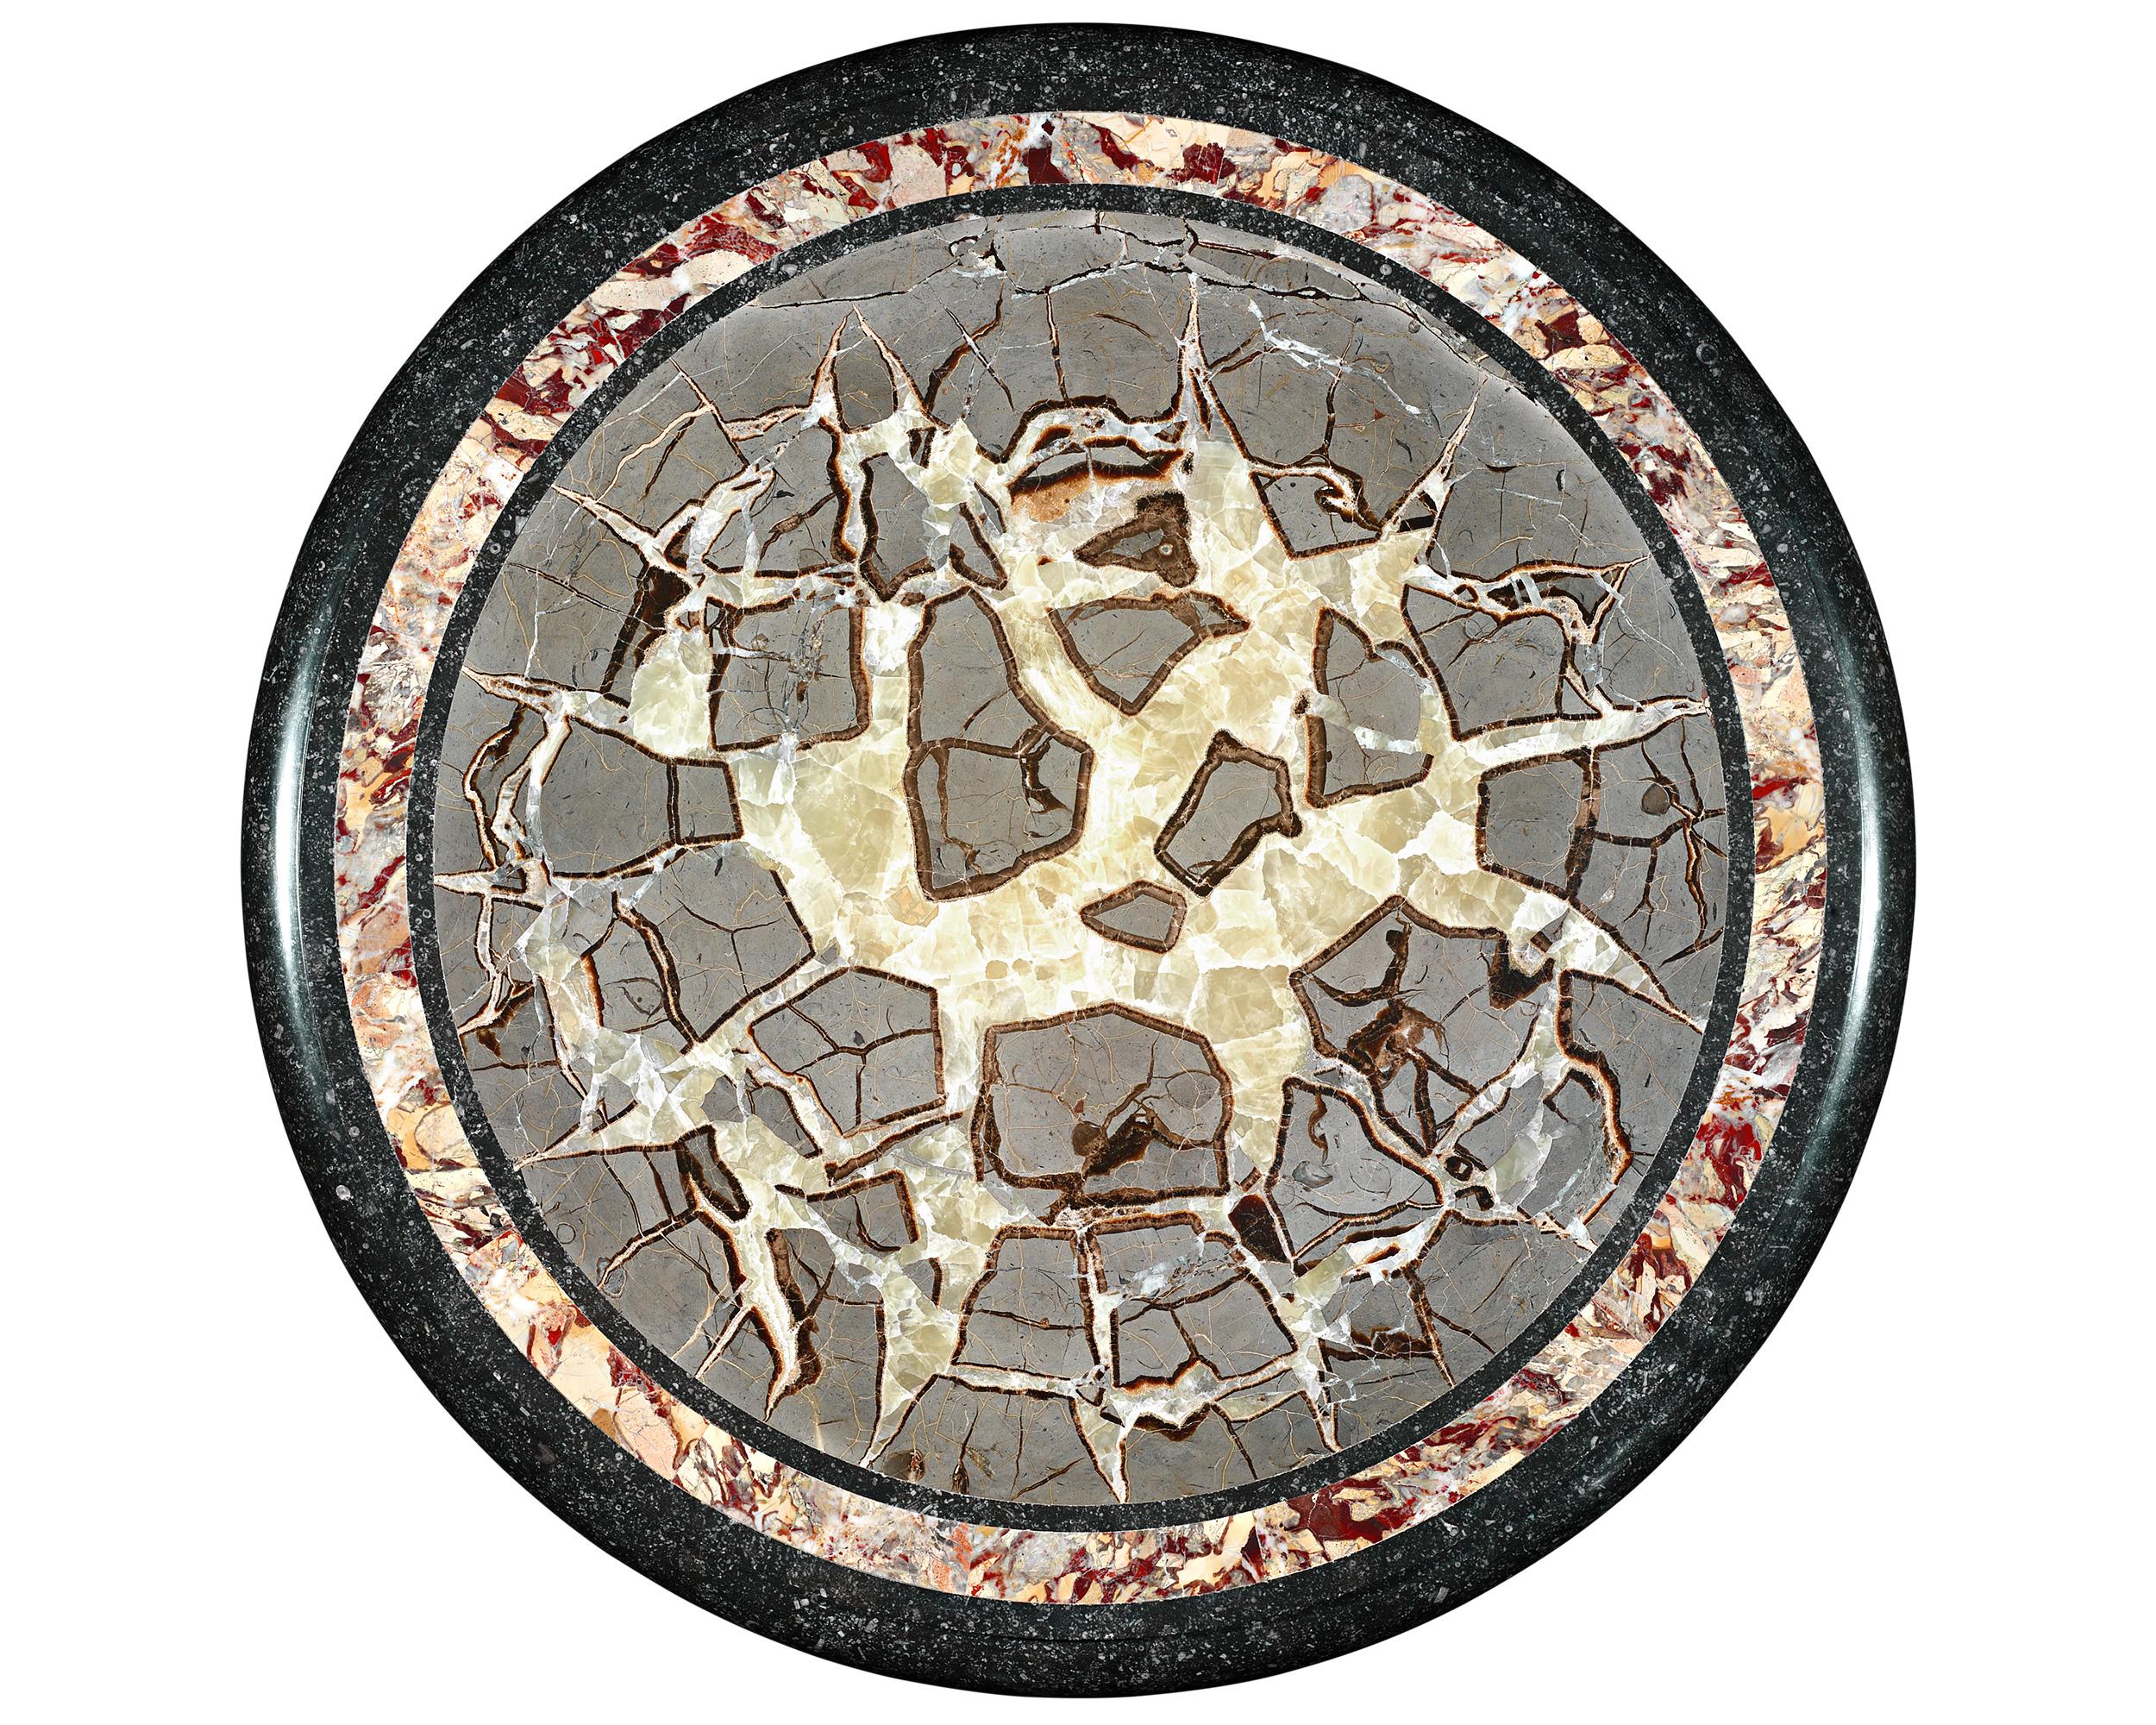 A remarkable display of English craftsmanship and a fascinating relic of natural history, this Regency-style table features an awe-inspiring specimen of turtle stone, an English marble formed from fossilized spheres known as septarian nodules. This